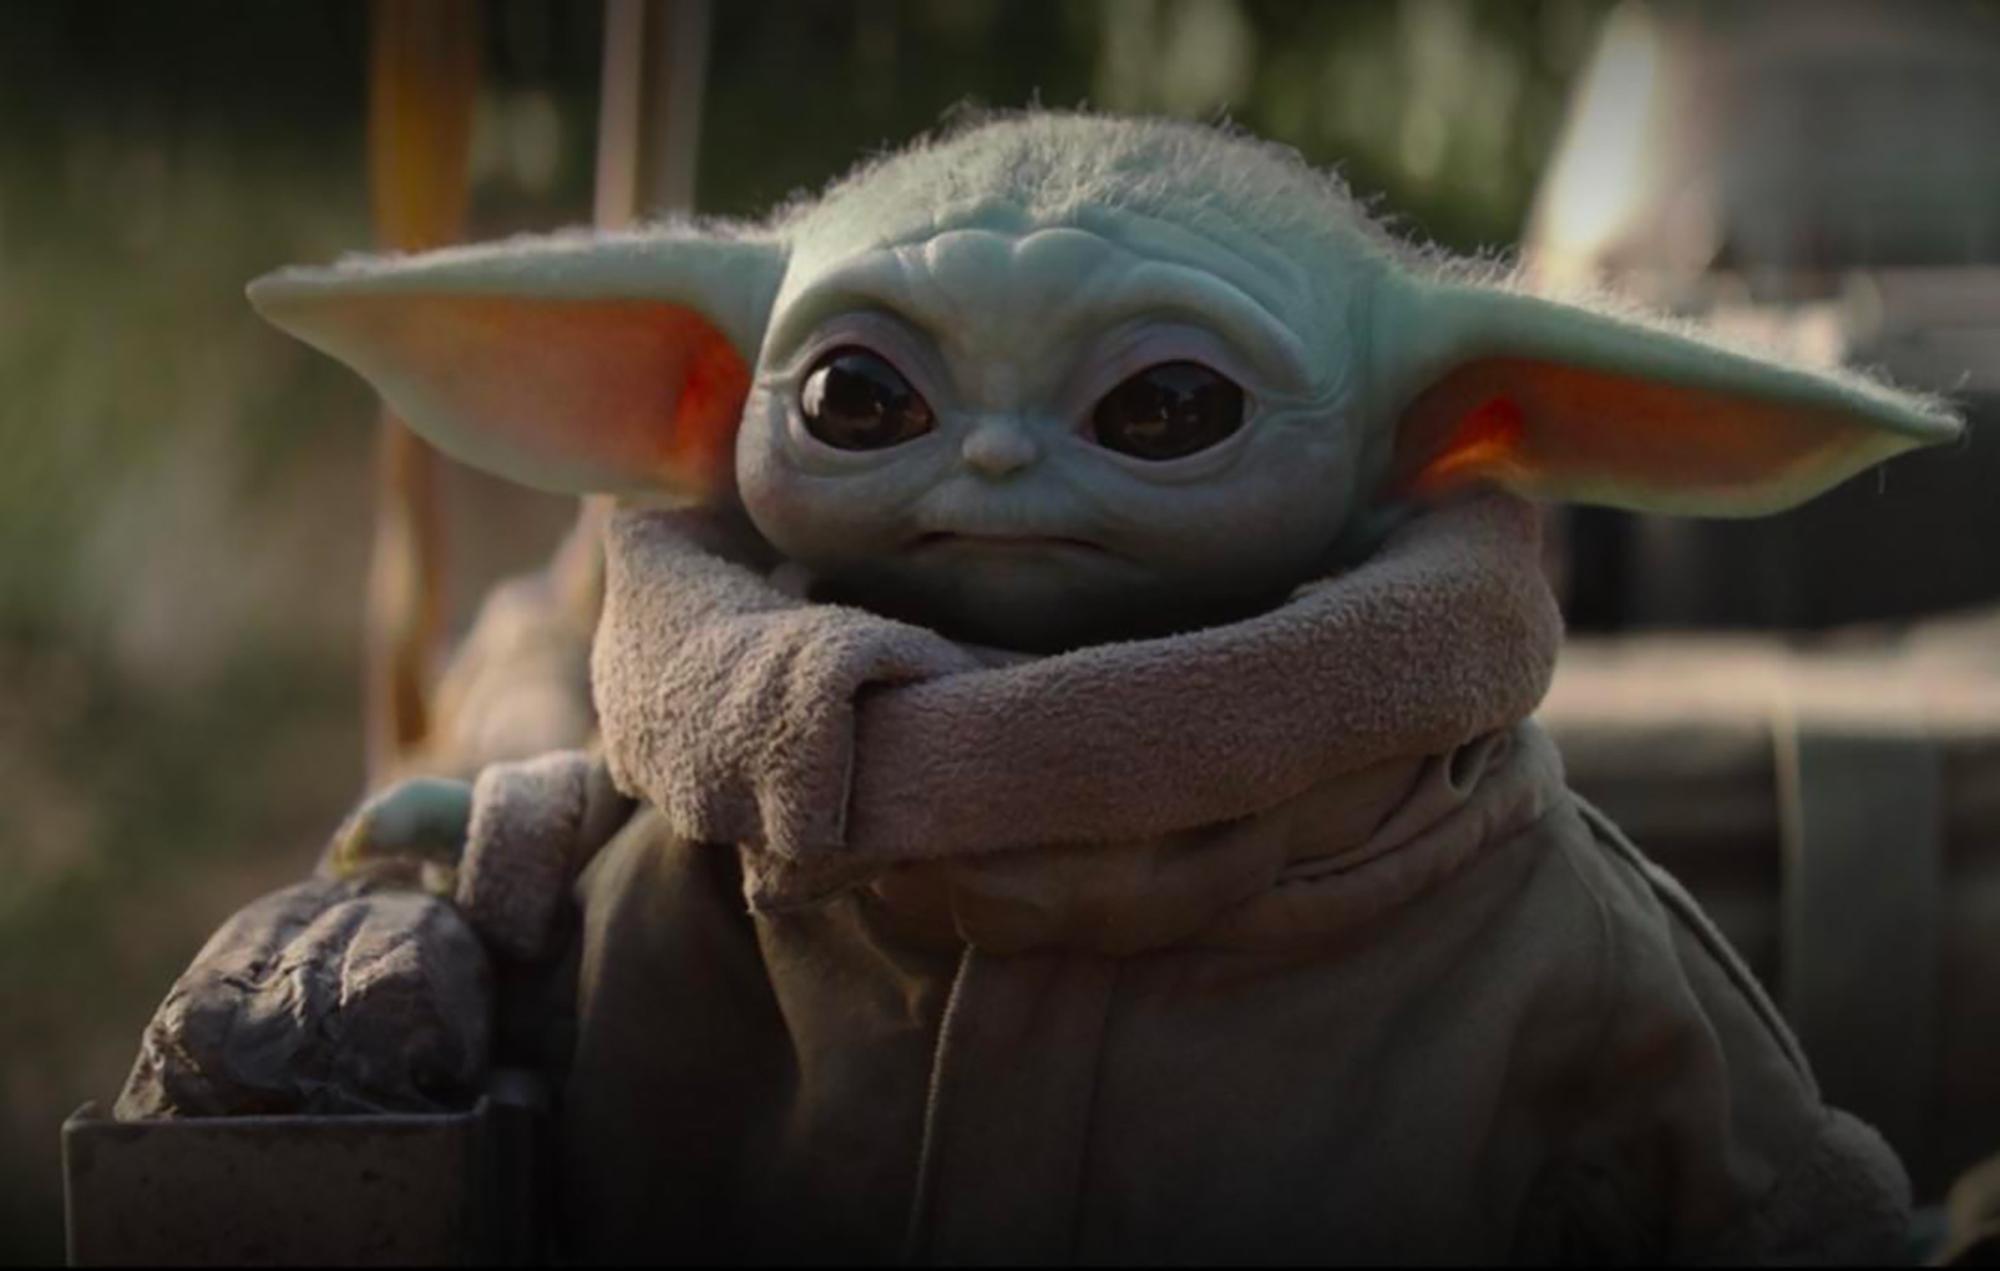 Bars in America are now serving Baby Yoda cocktails